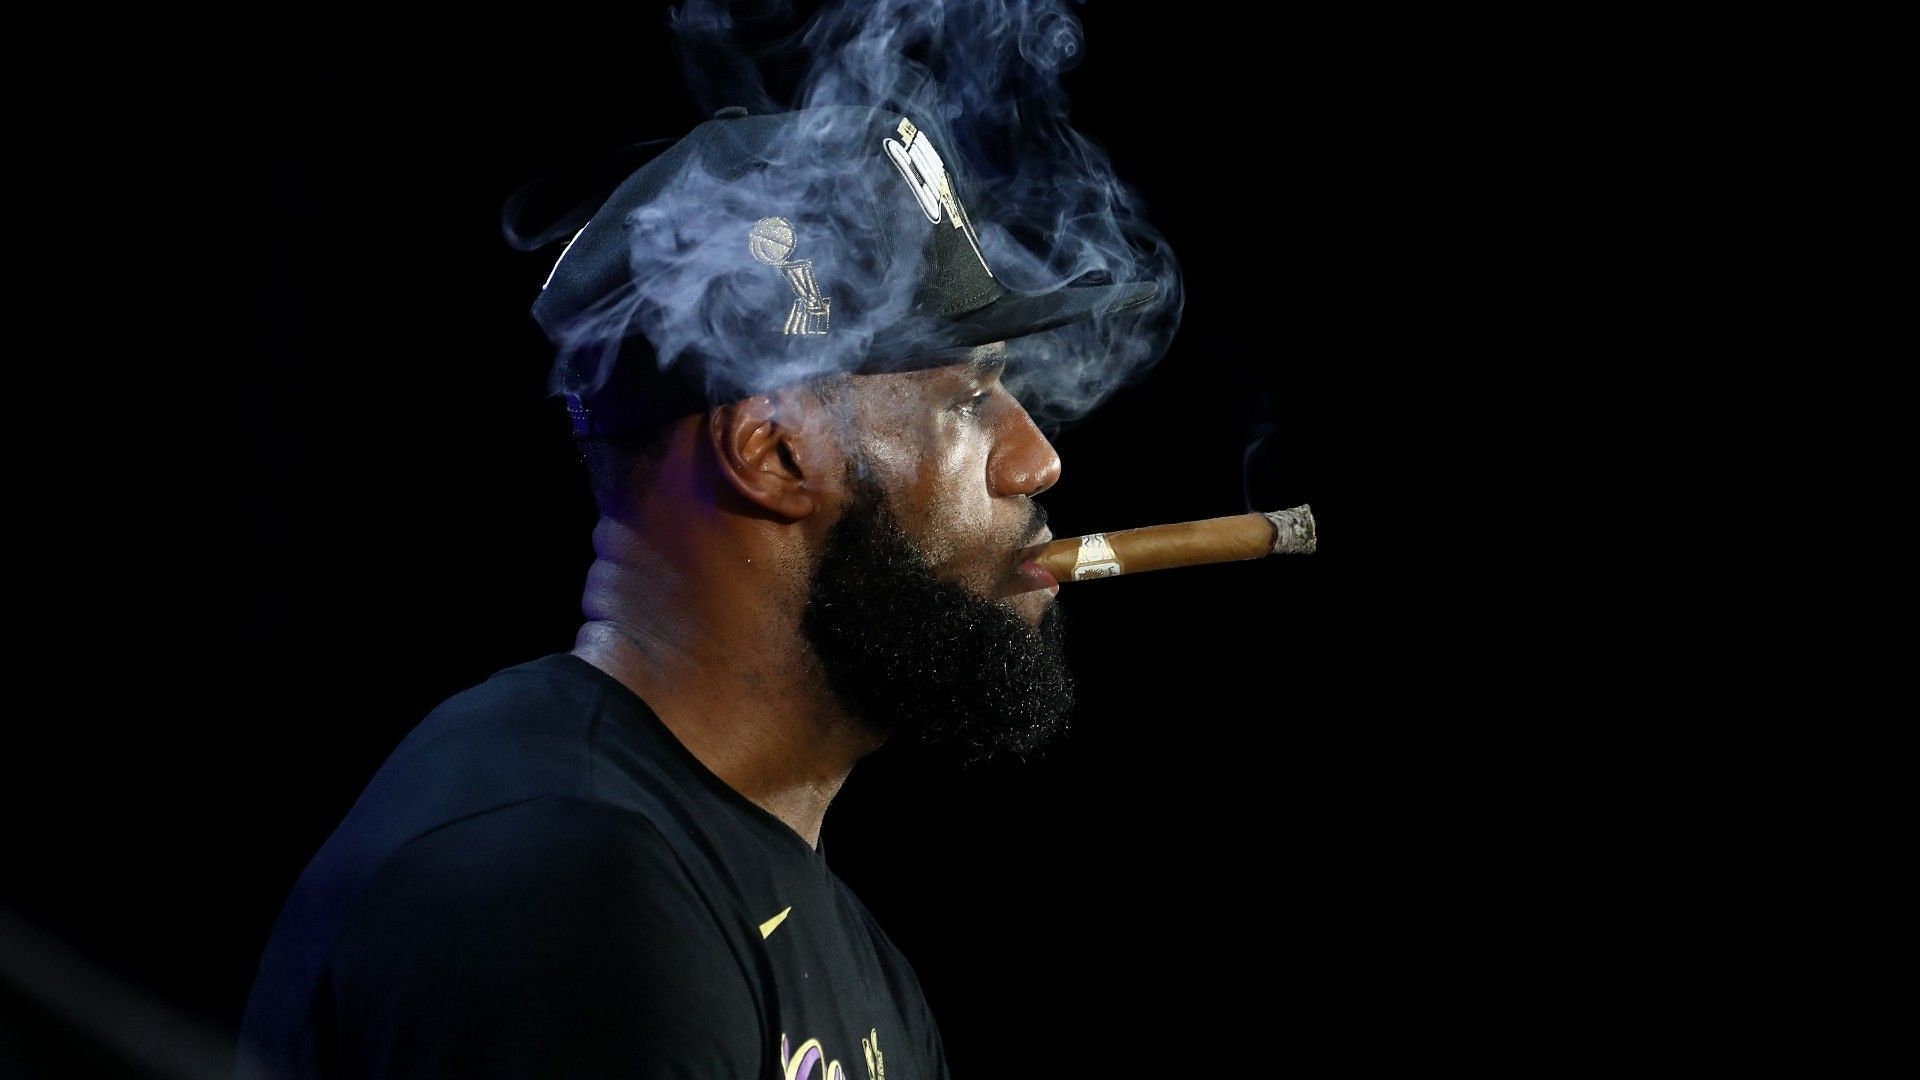 Watch Lebron James Makes A Stylish Entry In The Tunnel With A Cigar In His Hand For The La